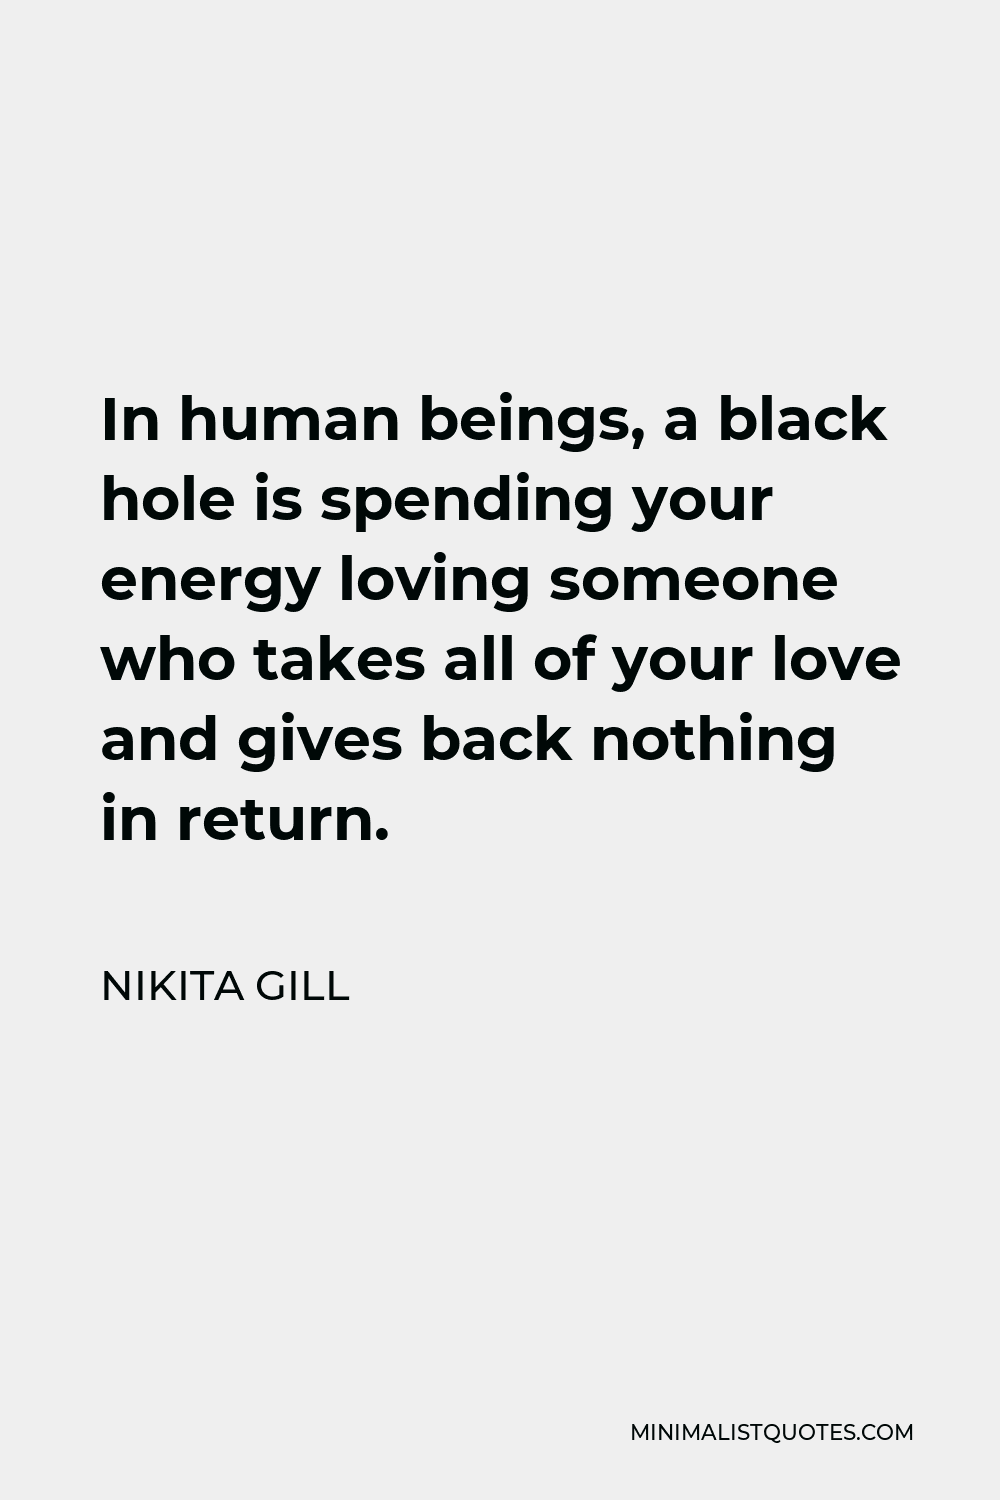 Nikita Gill Quote - In human beings, a black hole is spending your energy loving someone who takes all of your love and gives back nothing in return.